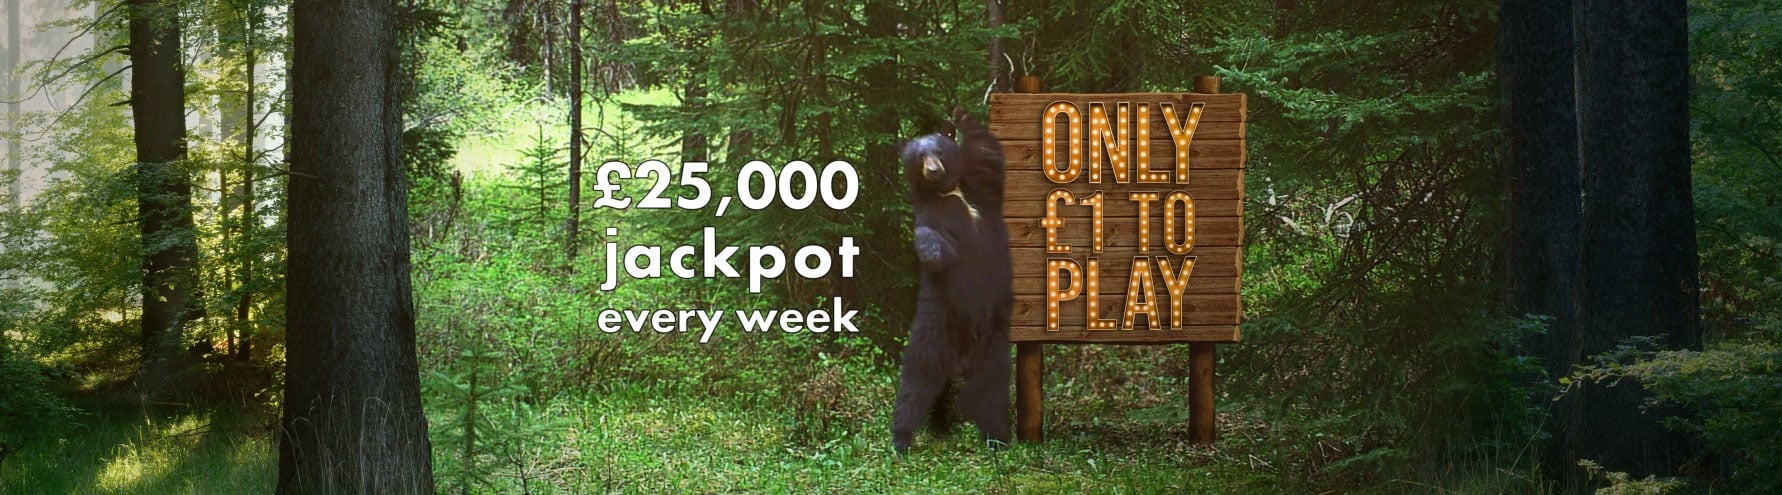 World Animal Protection UK's lottery banner image featuring a bear and text reading "£25,000 jackpot every week - only £1 to play"